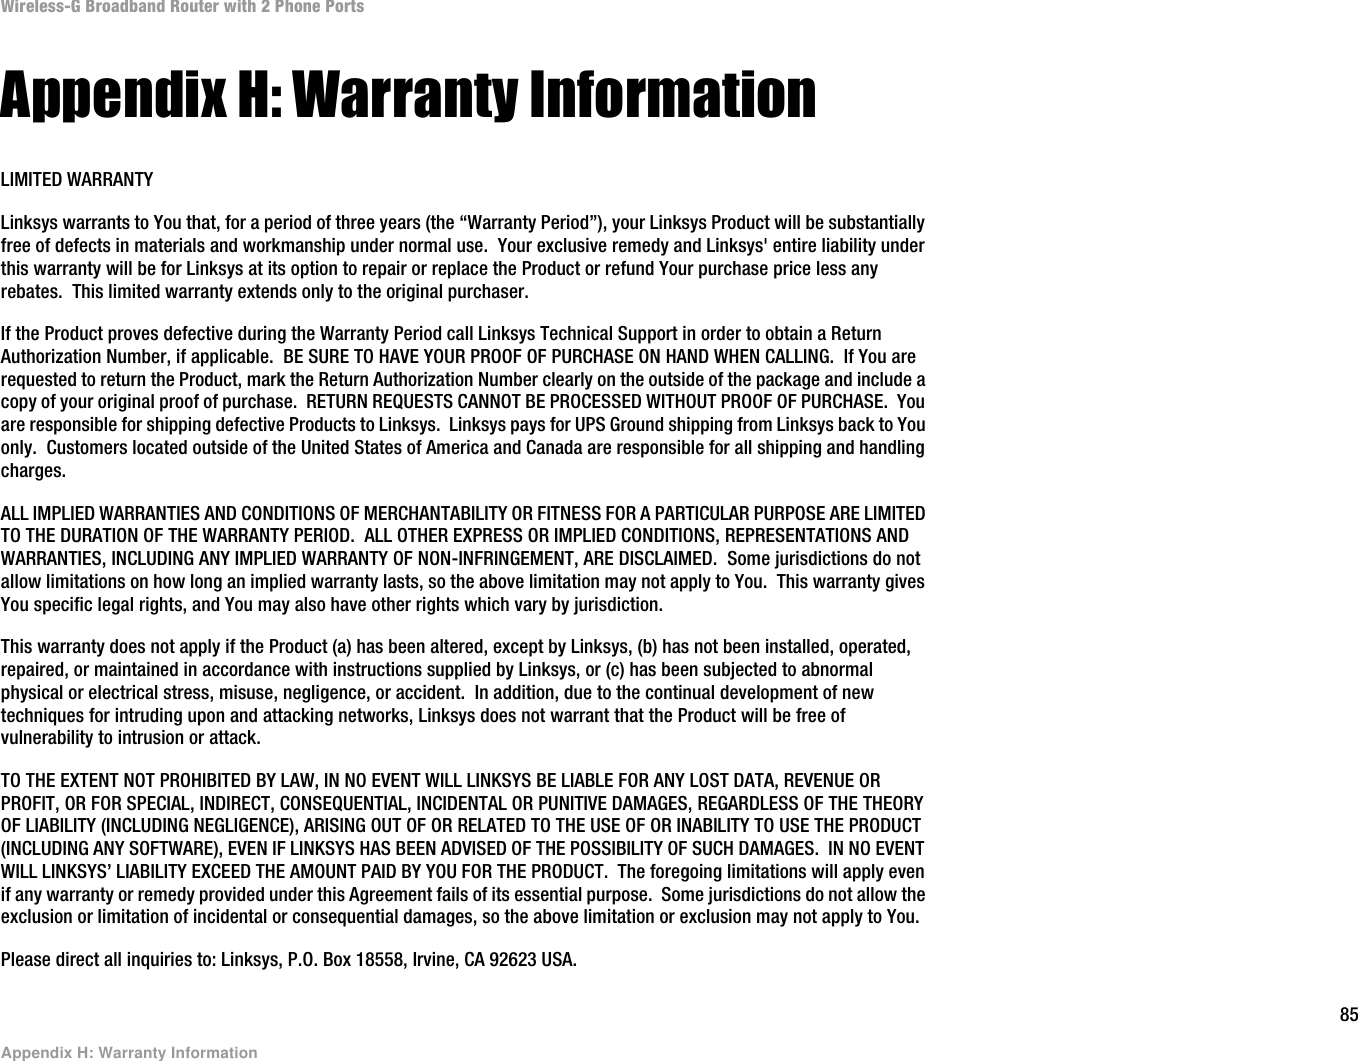 85Appendix H: Warranty InformationWireless-G Broadband Router with 2 Phone PortsAppendix H: Warranty InformationLIMITED WARRANTYLinksys warrants to You that, for a period of three years (the “Warranty Period”), your Linksys Product will be substantially free of defects in materials and workmanship under normal use.  Your exclusive remedy and Linksys&apos; entire liability under this warranty will be for Linksys at its option to repair or replace the Product or refund Your purchase price less any rebates.  This limited warranty extends only to the original purchaser.  If the Product proves defective during the Warranty Period call Linksys Technical Support in order to obtain a Return Authorization Number, if applicable.  BE SURE TO HAVE YOUR PROOF OF PURCHASE ON HAND WHEN CALLING.  If You are requested to return the Product, mark the Return Authorization Number clearly on the outside of the package and include a copy of your original proof of purchase.  RETURN REQUESTS CANNOT BE PROCESSED WITHOUT PROOF OF PURCHASE.  You are responsible for shipping defective Products to Linksys.  Linksys pays for UPS Ground shipping from Linksys back to You only.  Customers located outside of the United States of America and Canada are responsible for all shipping and handling charges. ALL IMPLIED WARRANTIES AND CONDITIONS OF MERCHANTABILITY OR FITNESS FOR A PARTICULAR PURPOSE ARE LIMITED TO THE DURATION OF THE WARRANTY PERIOD.  ALL OTHER EXPRESS OR IMPLIED CONDITIONS, REPRESENTATIONS AND WARRANTIES, INCLUDING ANY IMPLIED WARRANTY OF NON-INFRINGEMENT, ARE DISCLAIMED.  Some jurisdictions do not allow limitations on how long an implied warranty lasts, so the above limitation may not apply to You.  This warranty gives You specific legal rights, and You may also have other rights which vary by jurisdiction.This warranty does not apply if the Product (a) has been altered, except by Linksys, (b) has not been installed, operated, repaired, or maintained in accordance with instructions supplied by Linksys, or (c) has been subjected to abnormal physical or electrical stress, misuse, negligence, or accident.  In addition, due to the continual development of new techniques for intruding upon and attacking networks, Linksys does not warrant that the Product will be free of vulnerability to intrusion or attack.TO THE EXTENT NOT PROHIBITED BY LAW, IN NO EVENT WILL LINKSYS BE LIABLE FOR ANY LOST DATA, REVENUE OR PROFIT, OR FOR SPECIAL, INDIRECT, CONSEQUENTIAL, INCIDENTAL OR PUNITIVE DAMAGES, REGARDLESS OF THE THEORY OF LIABILITY (INCLUDING NEGLIGENCE), ARISING OUT OF OR RELATED TO THE USE OF OR INABILITY TO USE THE PRODUCT (INCLUDING ANY SOFTWARE), EVEN IF LINKSYS HAS BEEN ADVISED OF THE POSSIBILITY OF SUCH DAMAGES.  IN NO EVENT WILL LINKSYS’ LIABILITY EXCEED THE AMOUNT PAID BY YOU FOR THE PRODUCT.  The foregoing limitations will apply even if any warranty or remedy provided under this Agreement fails of its essential purpose.  Some jurisdictions do not allow the exclusion or limitation of incidental or consequential damages, so the above limitation or exclusion may not apply to You.Please direct all inquiries to: Linksys, P.O. Box 18558, Irvine, CA 92623 USA.